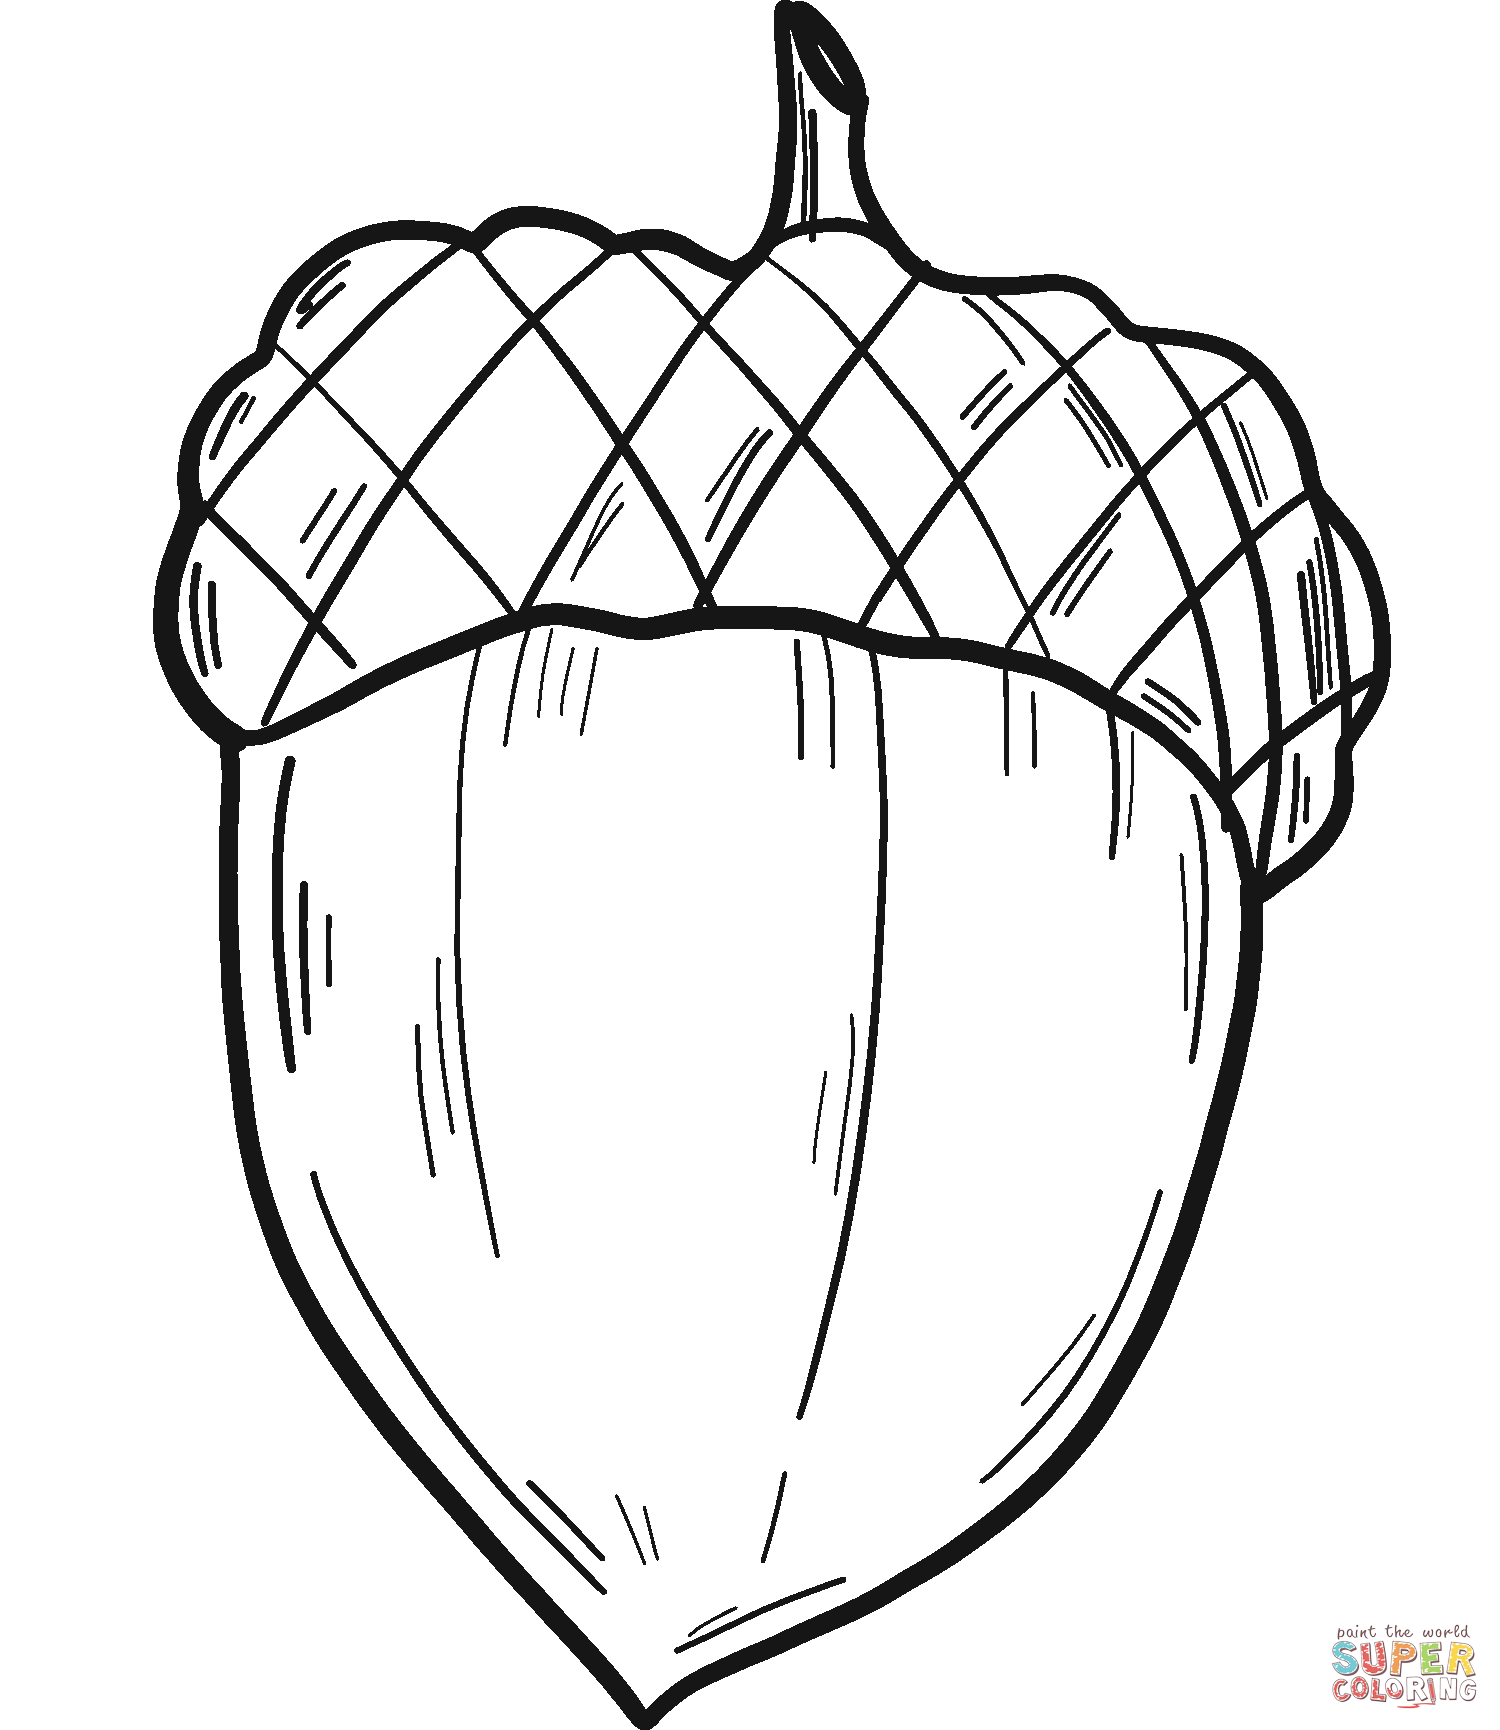 Acorn coloring page free printable coloring pages